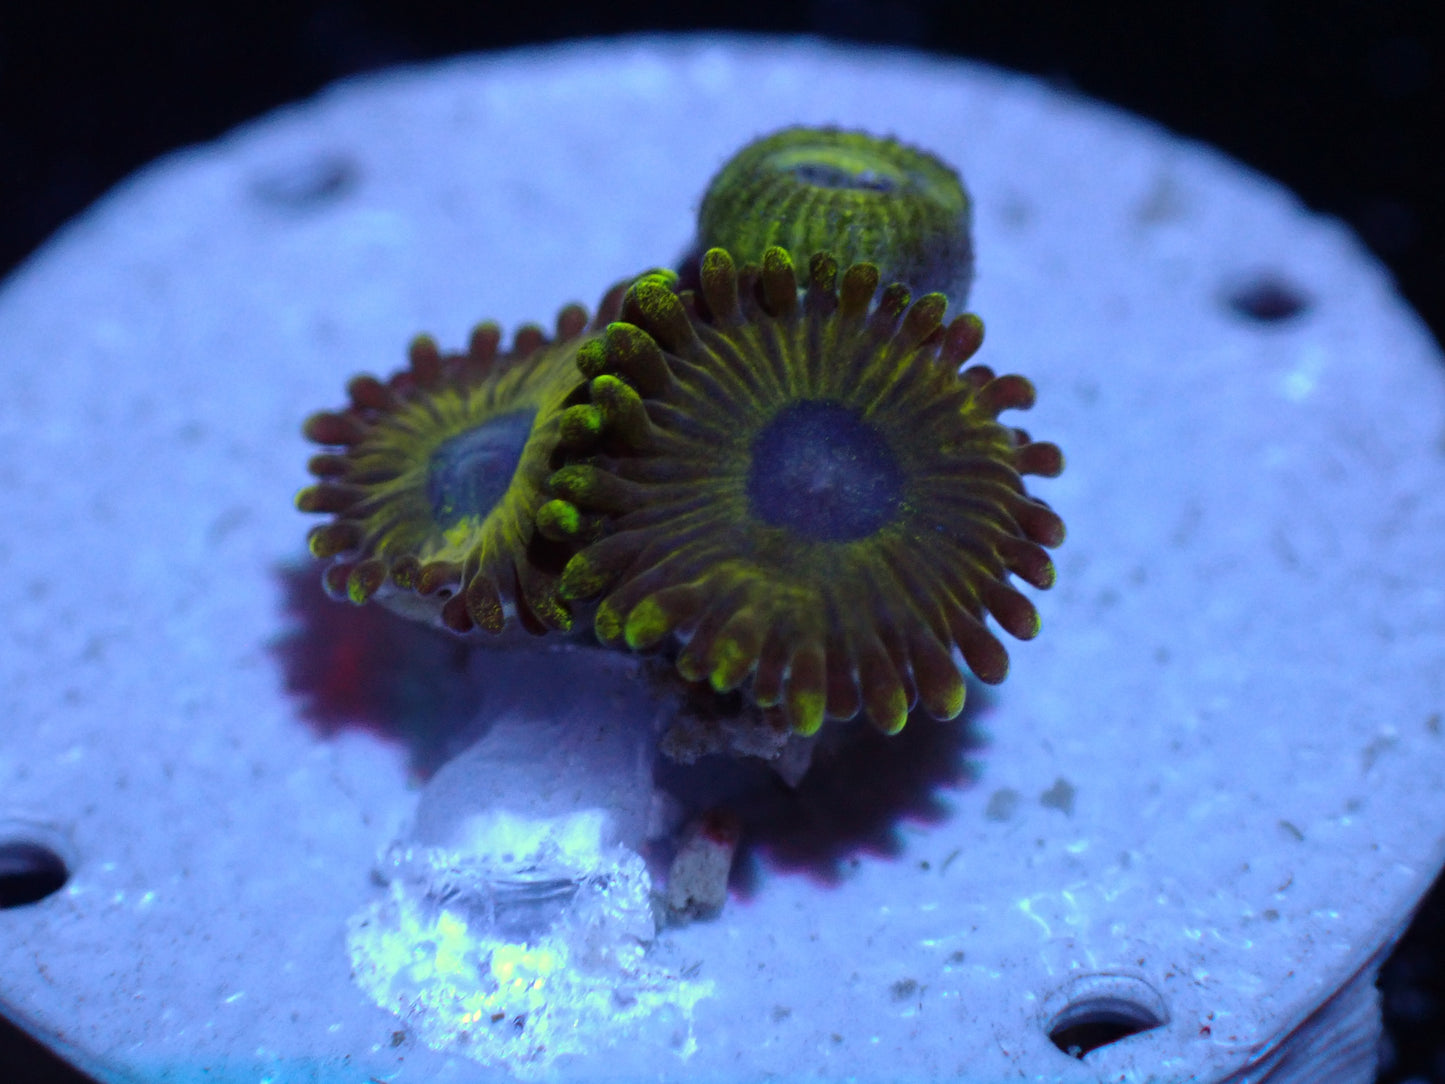 Pikachu Zoas Auctions 3/27 ended